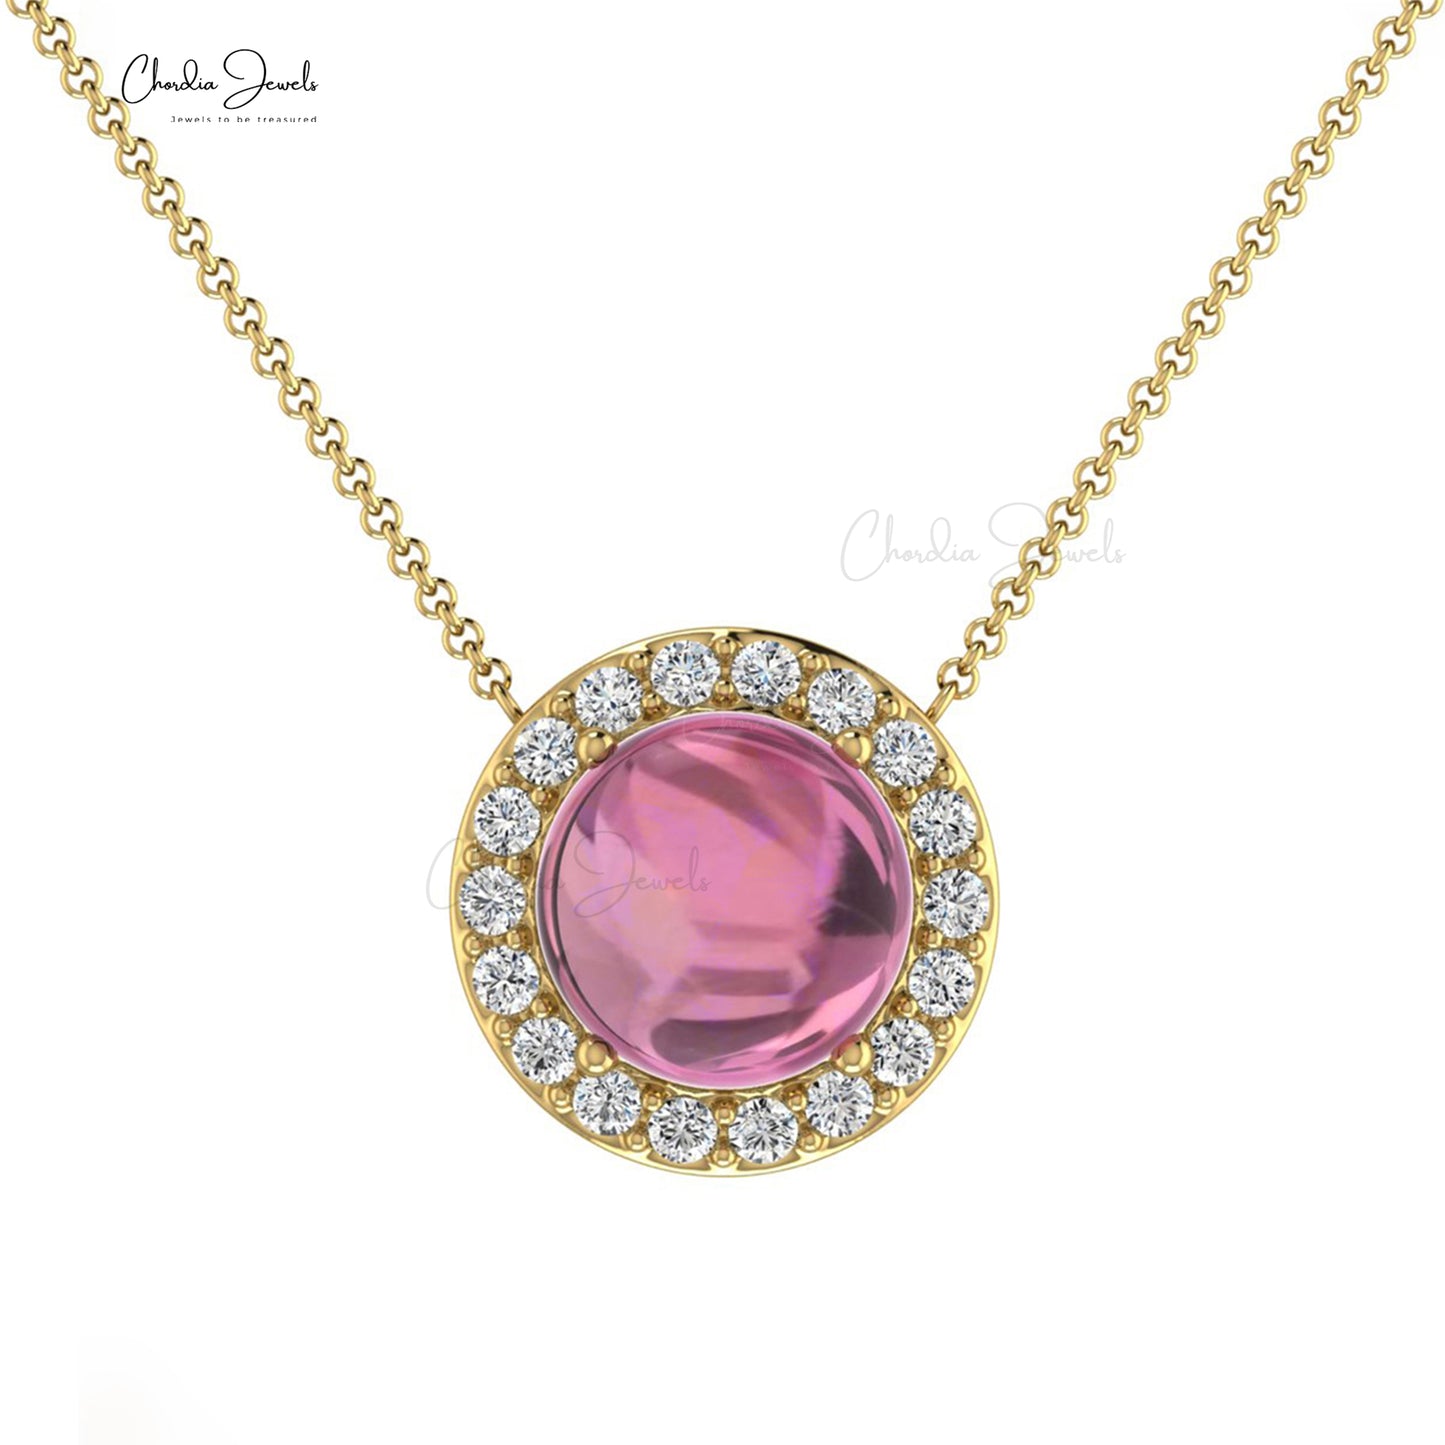 Natural Pink Tourmaline Cabochon Necklace, 14k Solid Gold Gemstone Necklace, 6mm Round Cut October Birthstone Dainty Necklace Gift for Her